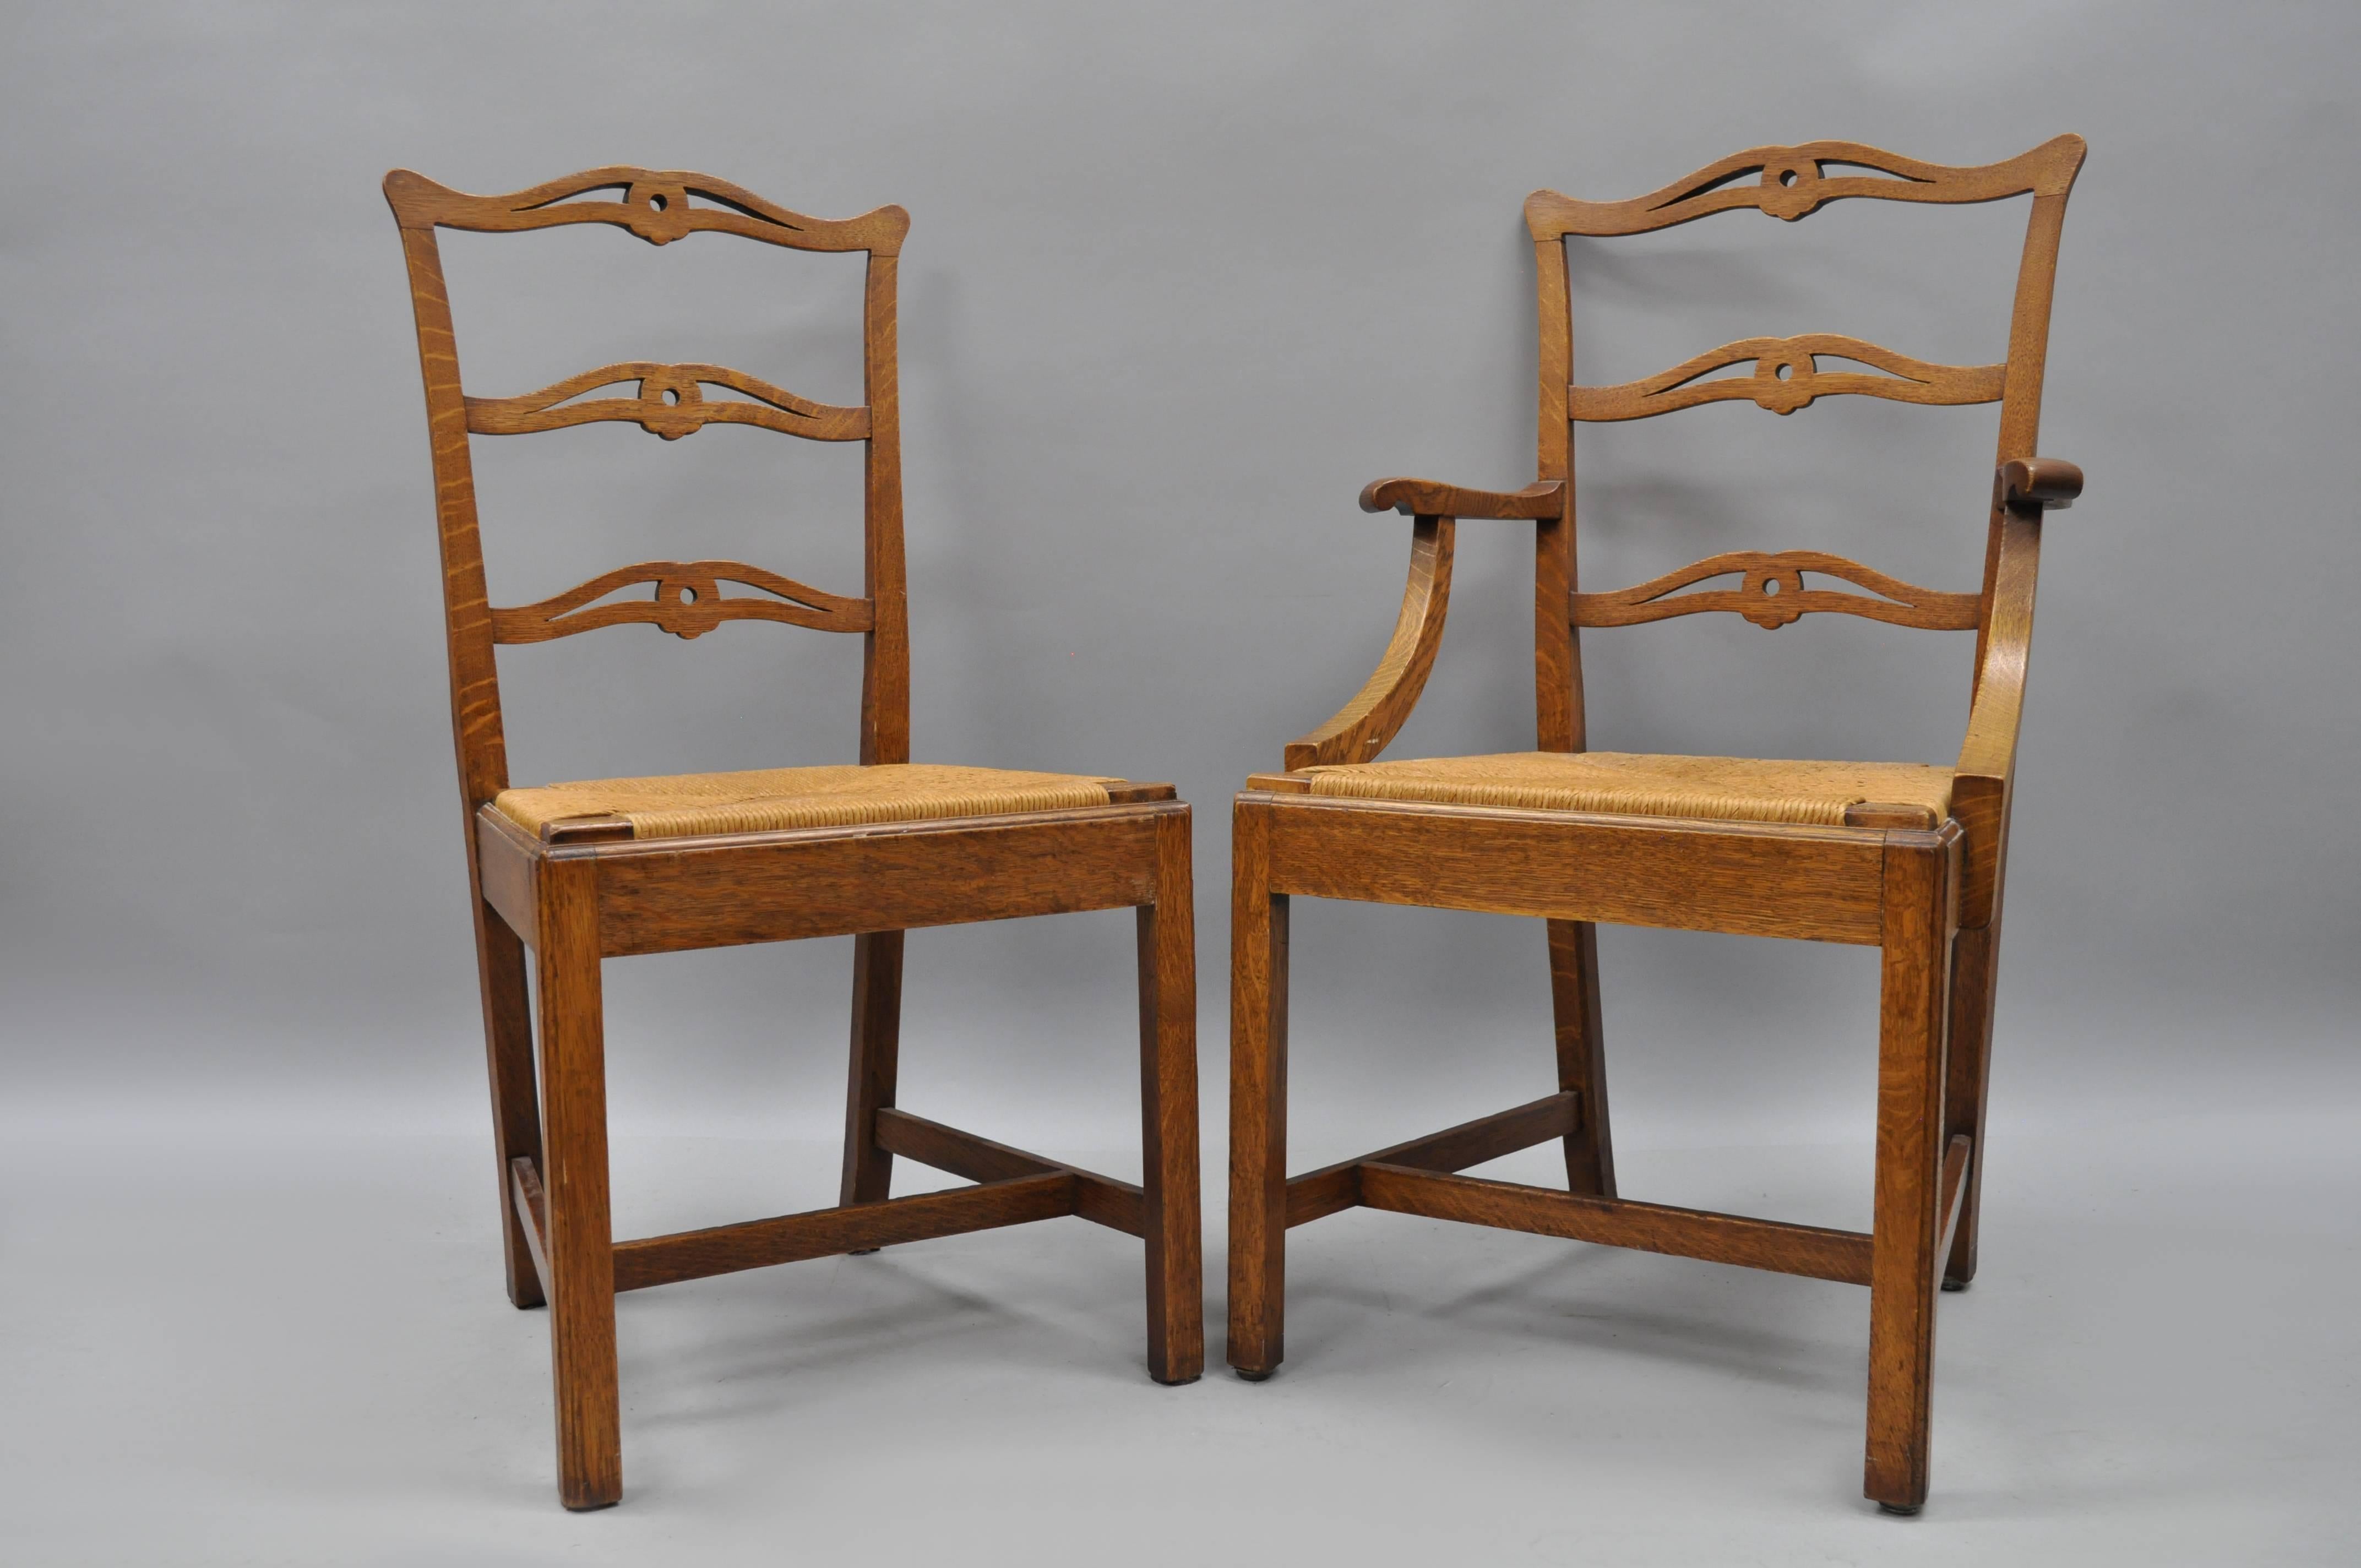 Set of ten antique golden tiger oak dining chairs, circa early 1900s. Set includes eight side chairs, two armchairs, woven rush seats, ladder ribbon backs, solid oak wood construction, beautiful wood grain. Six side chairs with lacquered woven rush